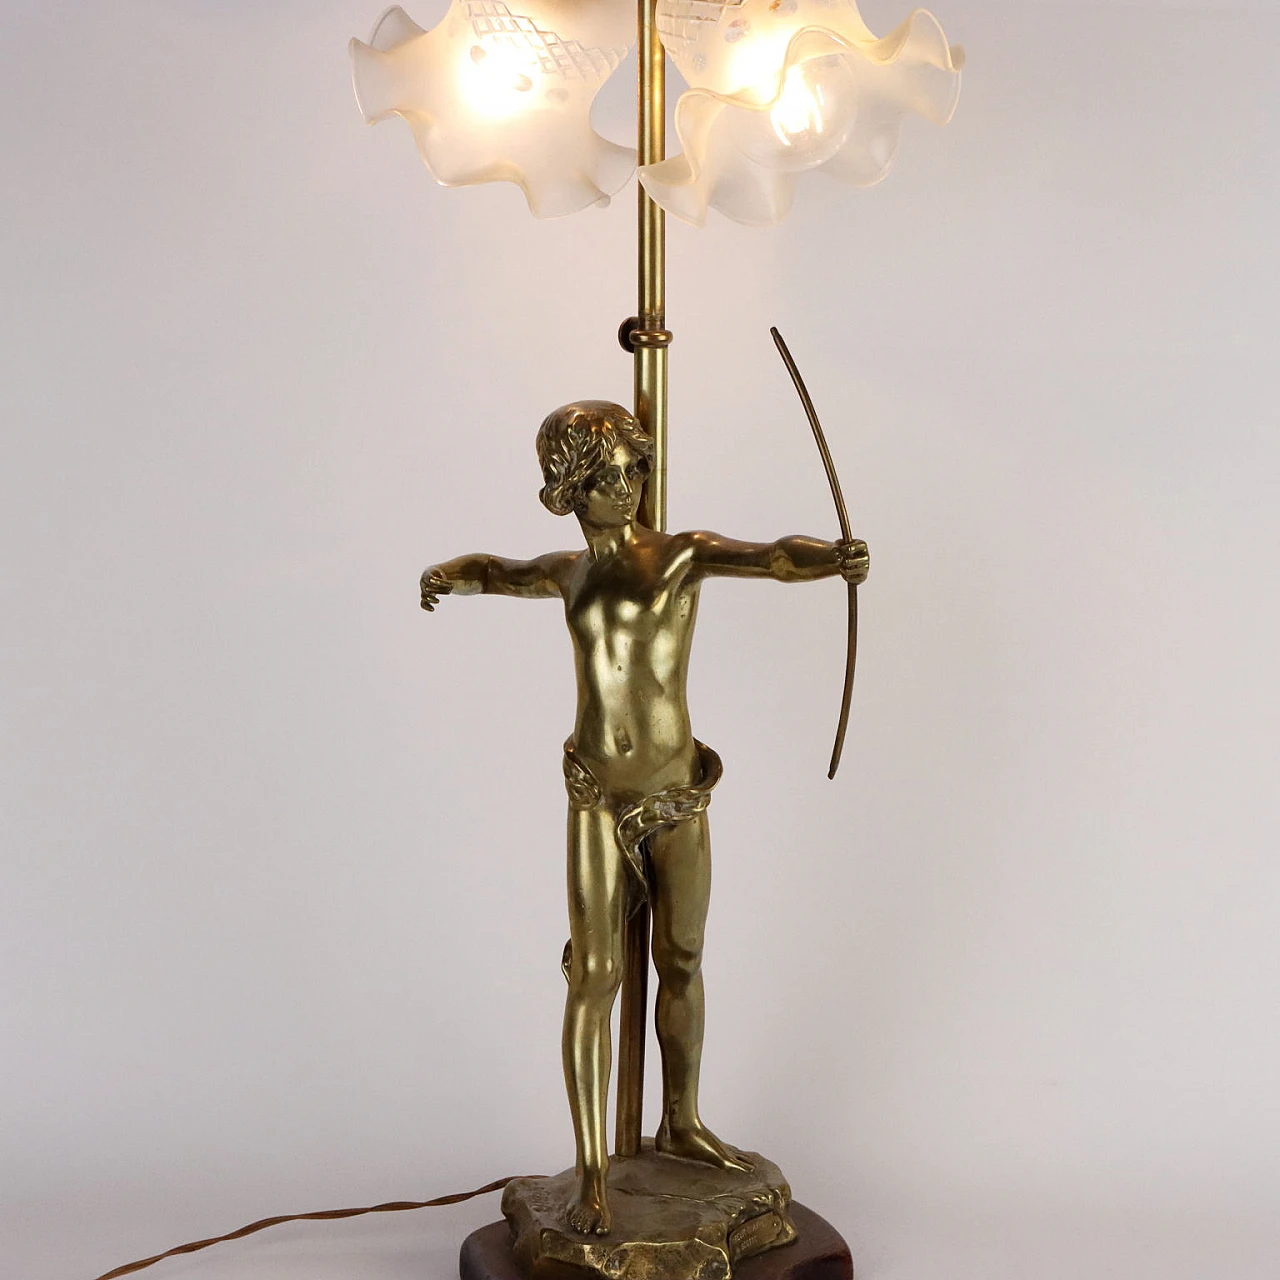 Table lamp with bronze sculpture & glass lampshades by Scotte 3